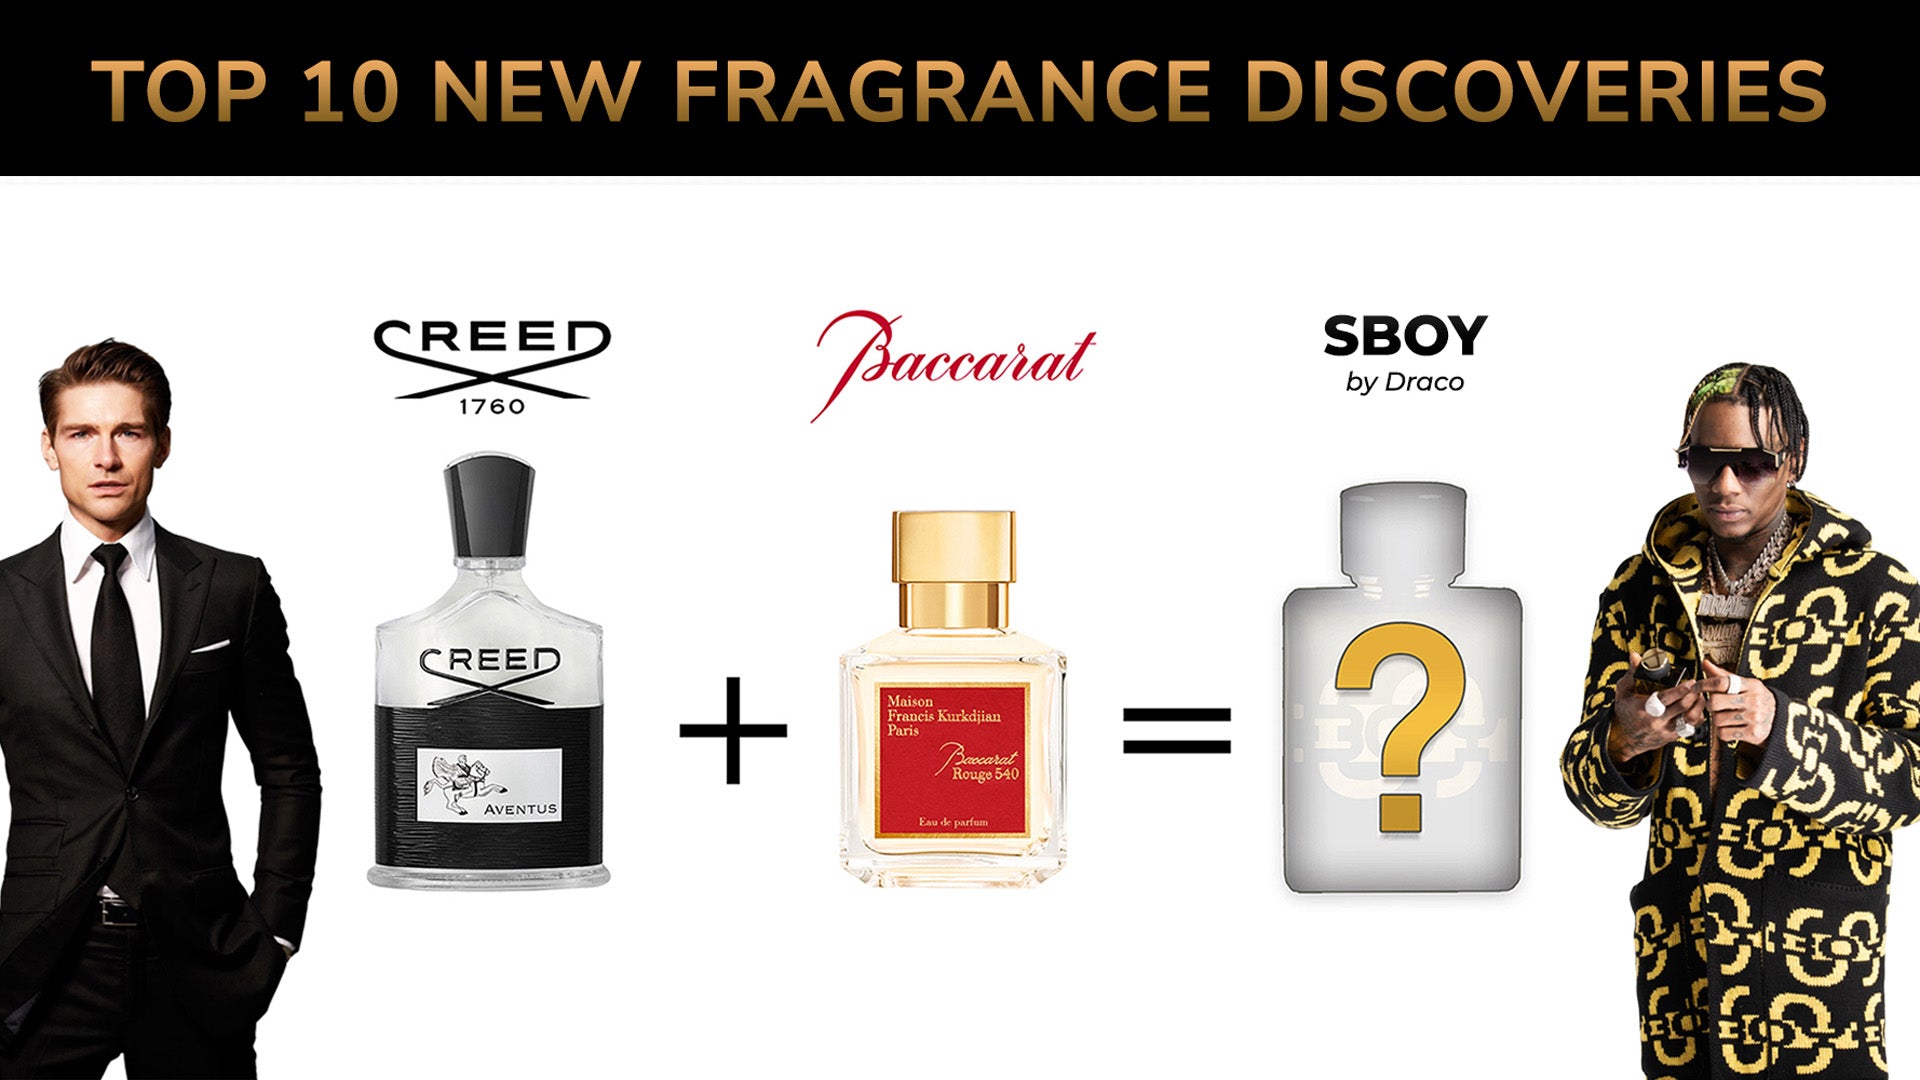 Top 10 New Fragrance Discoveries by Jeremy Fragrance